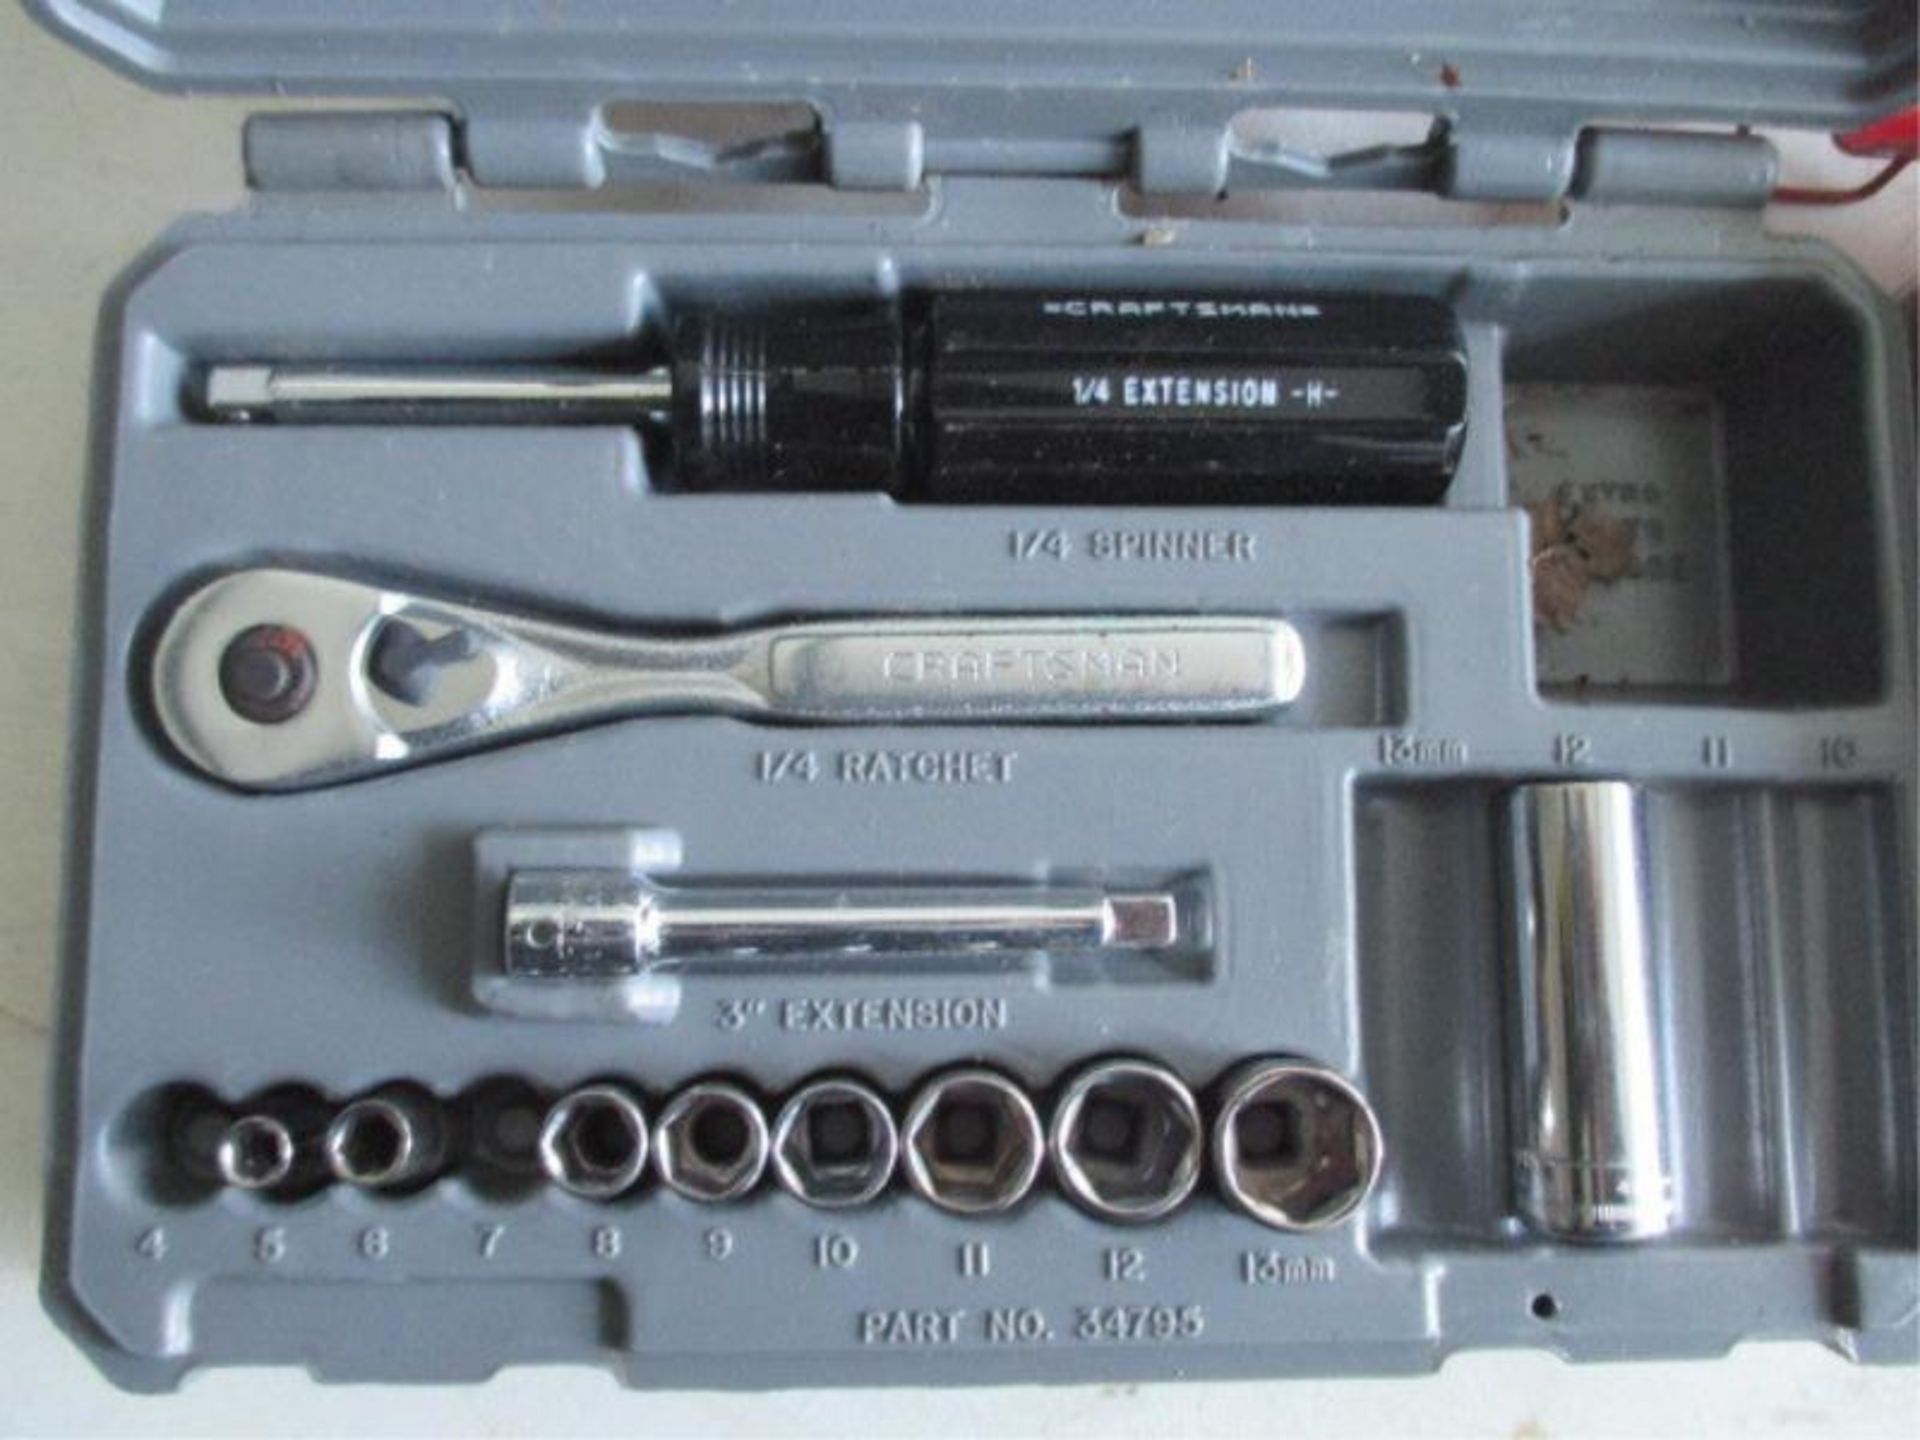 (4) Cases Asst Tool Sets - (1) Craftsman 12-pc Socket Wrench Set - New in Plastic, (1) Partial - Image 3 of 5